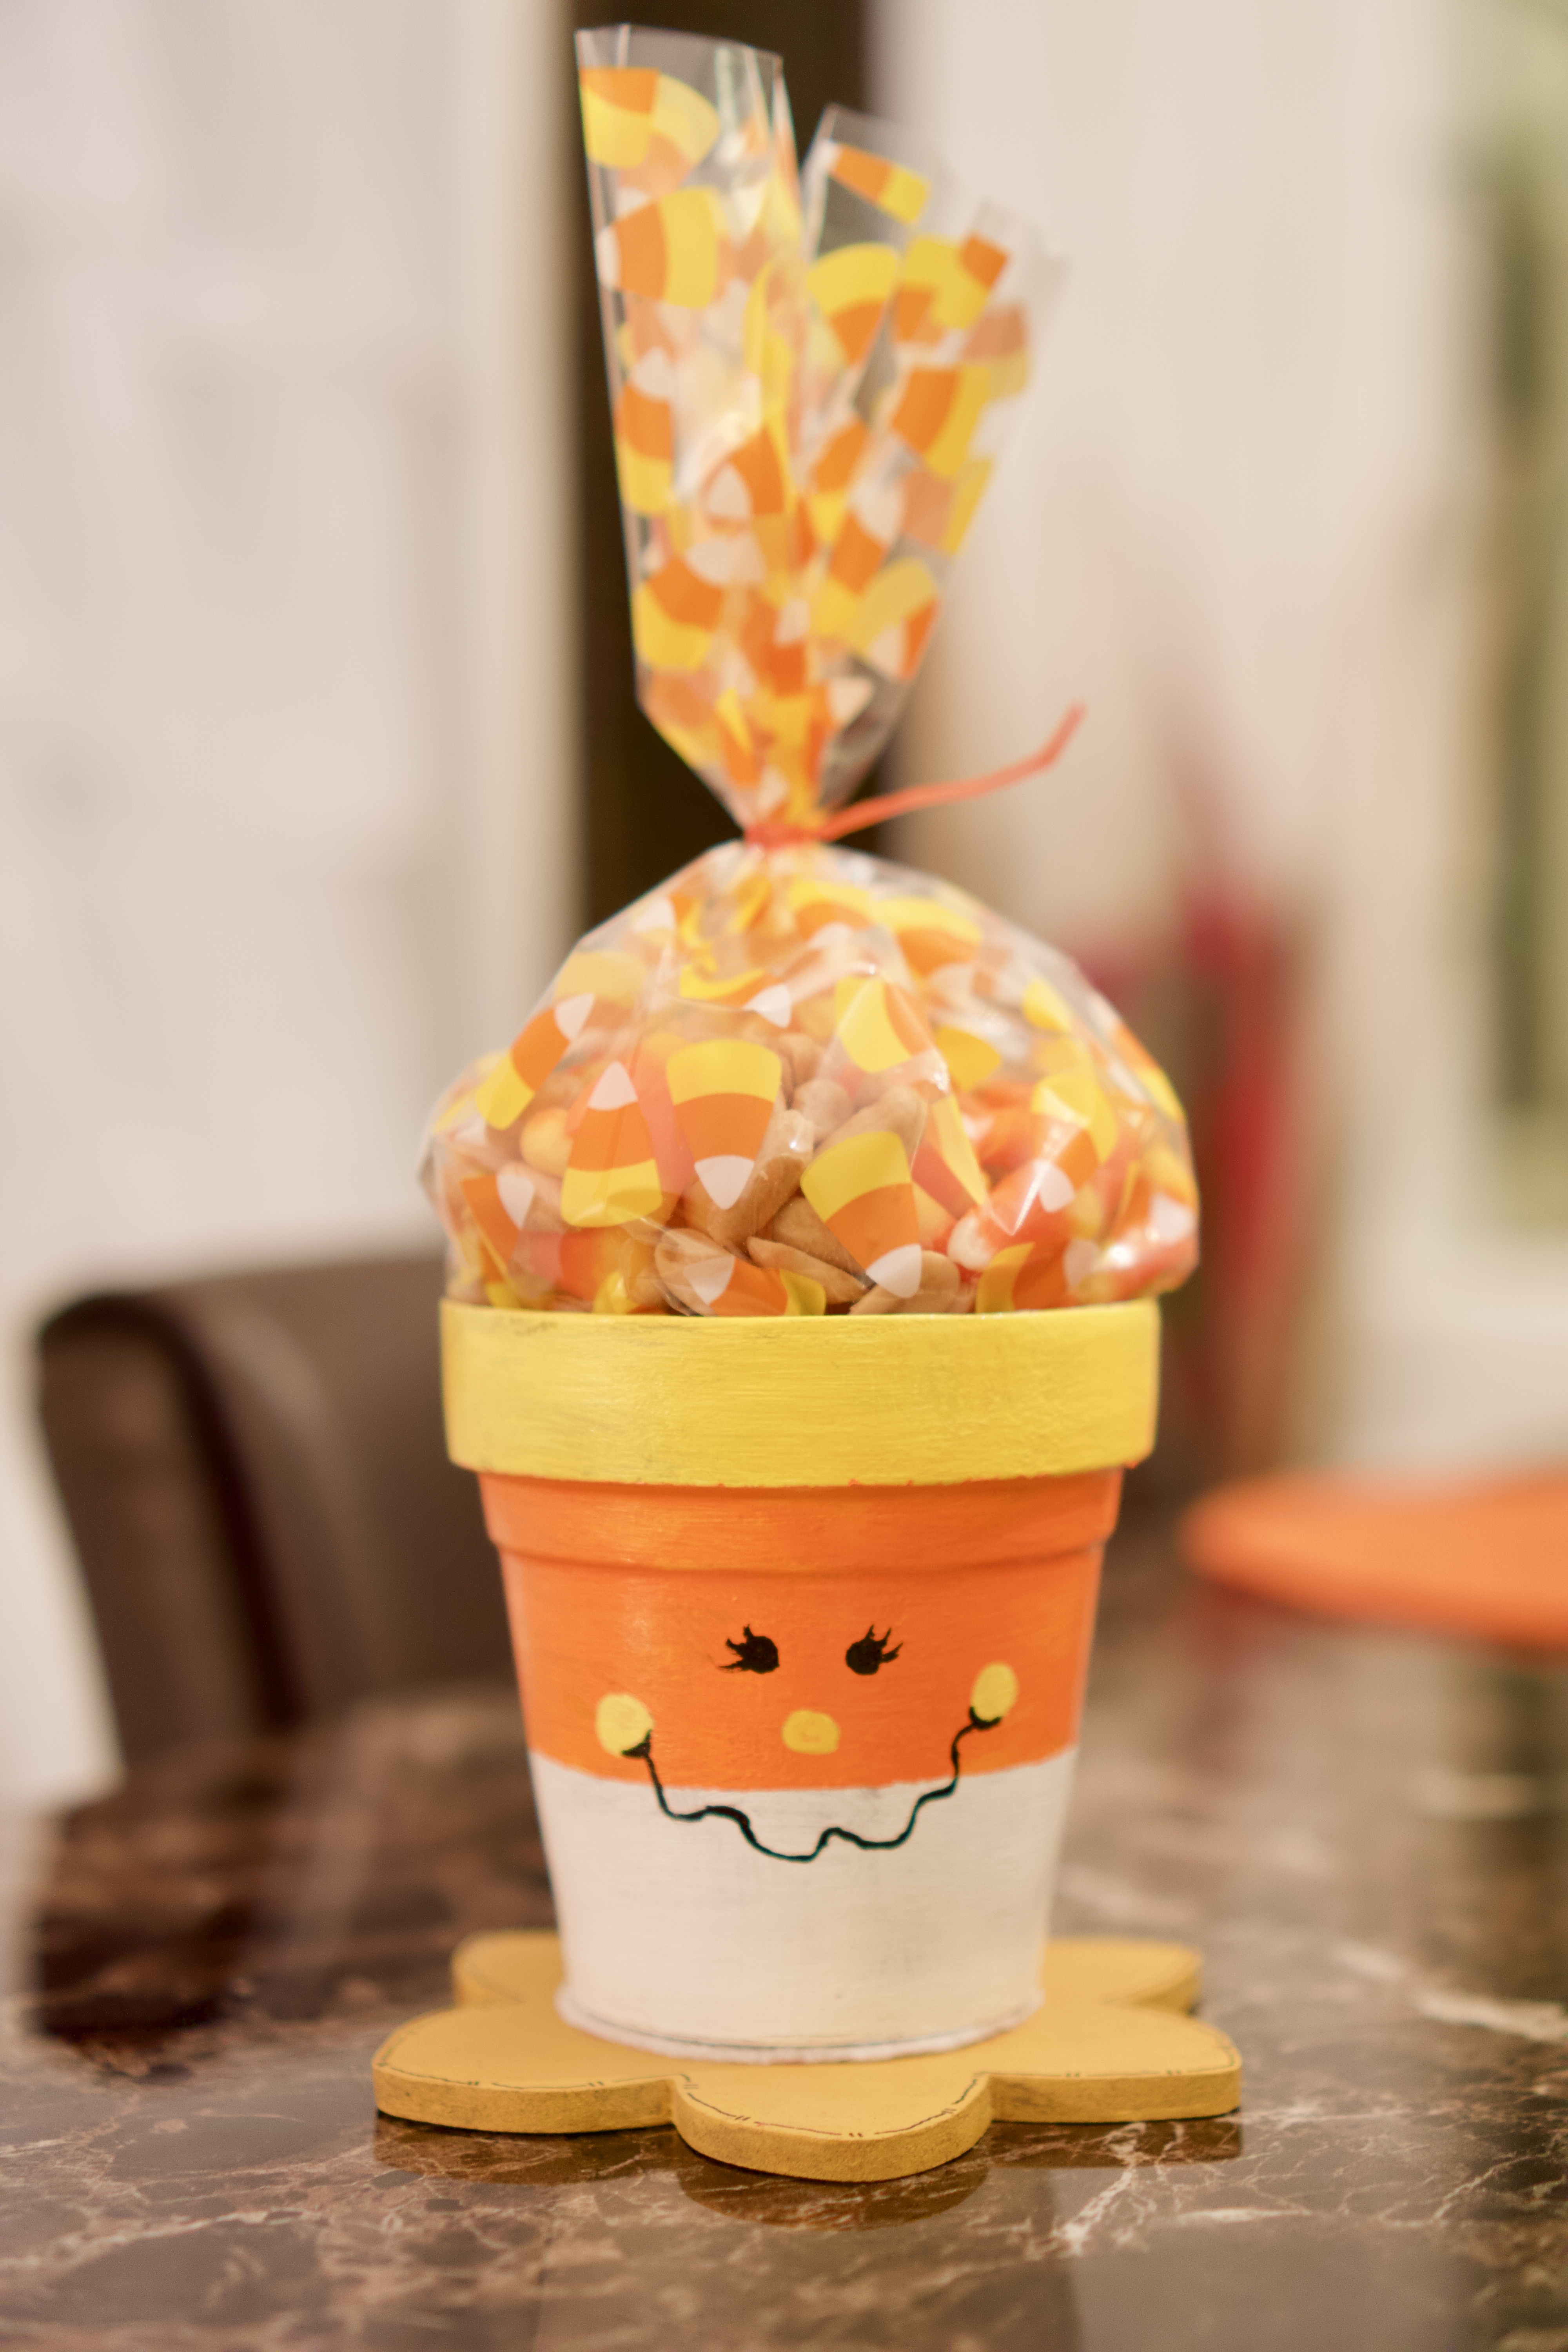 Candy Corn Pots © 2018 ericarobbin.com | All rights reserved.